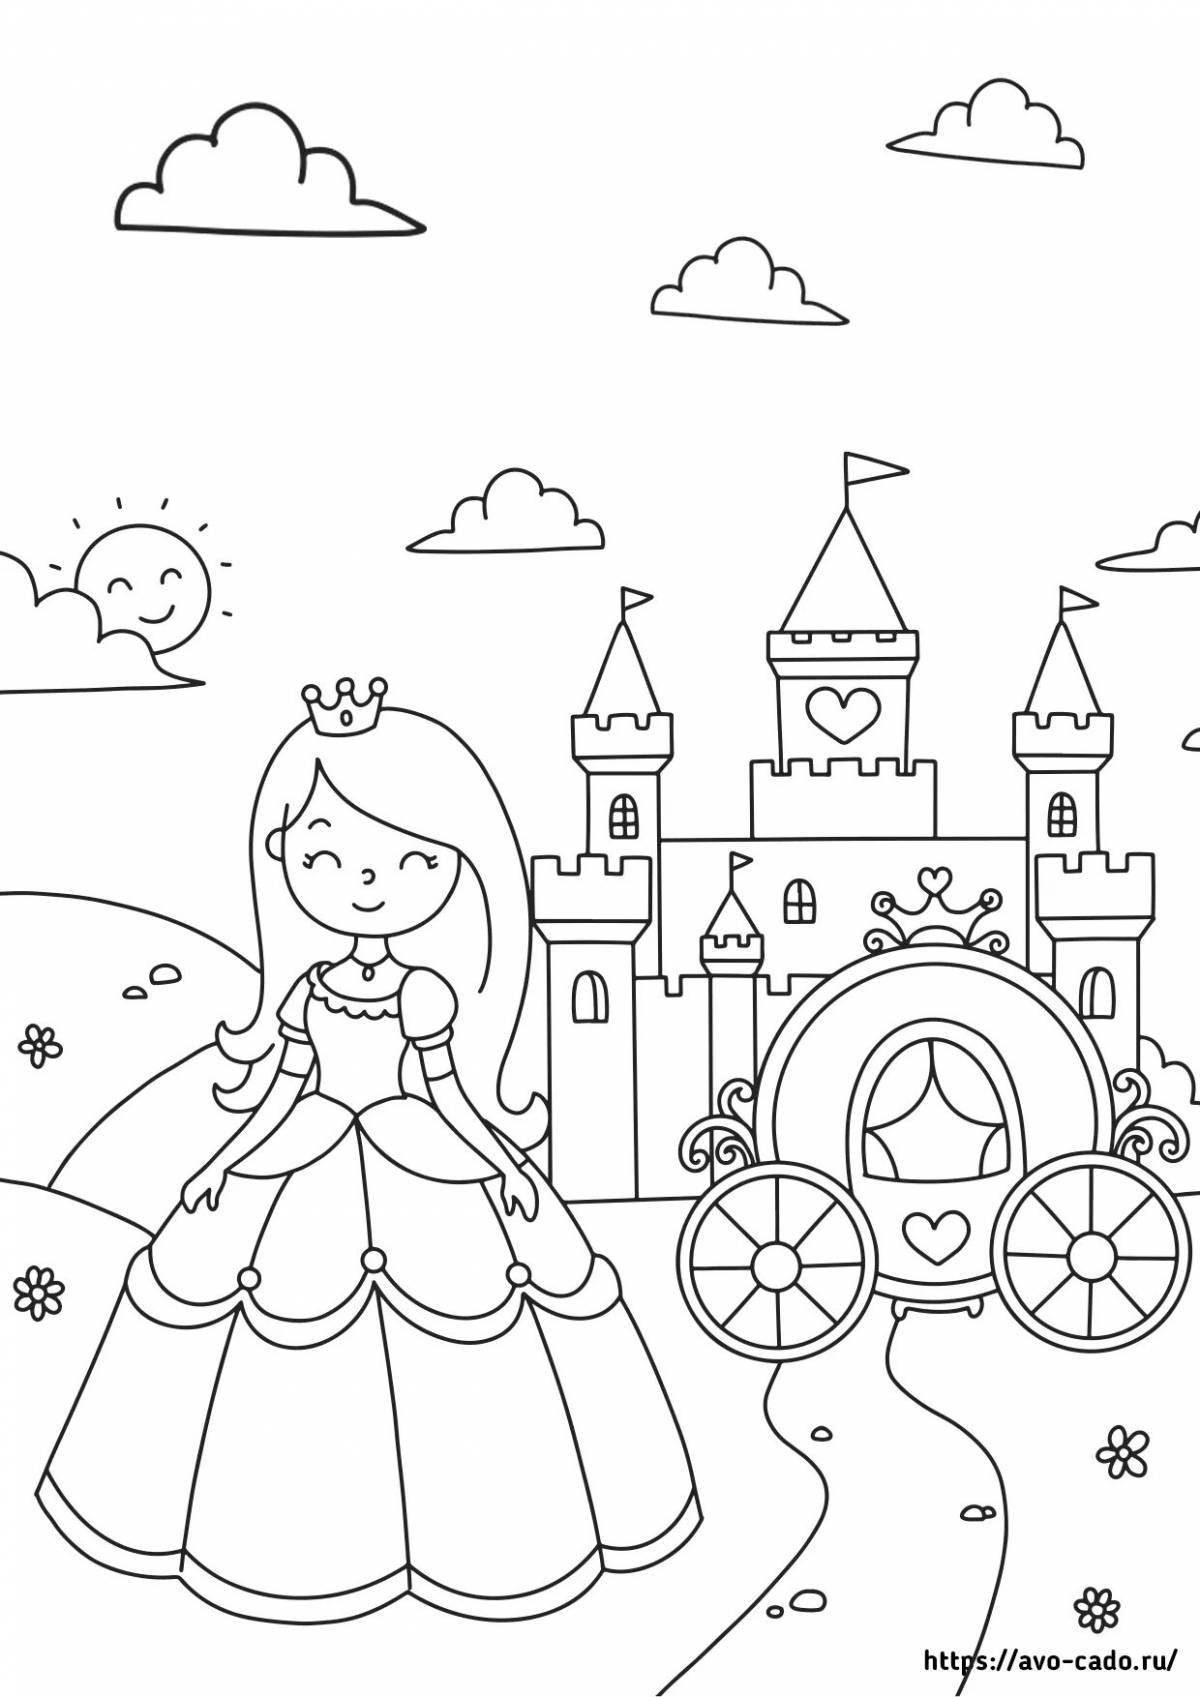 Majestic castle coloring book for girls